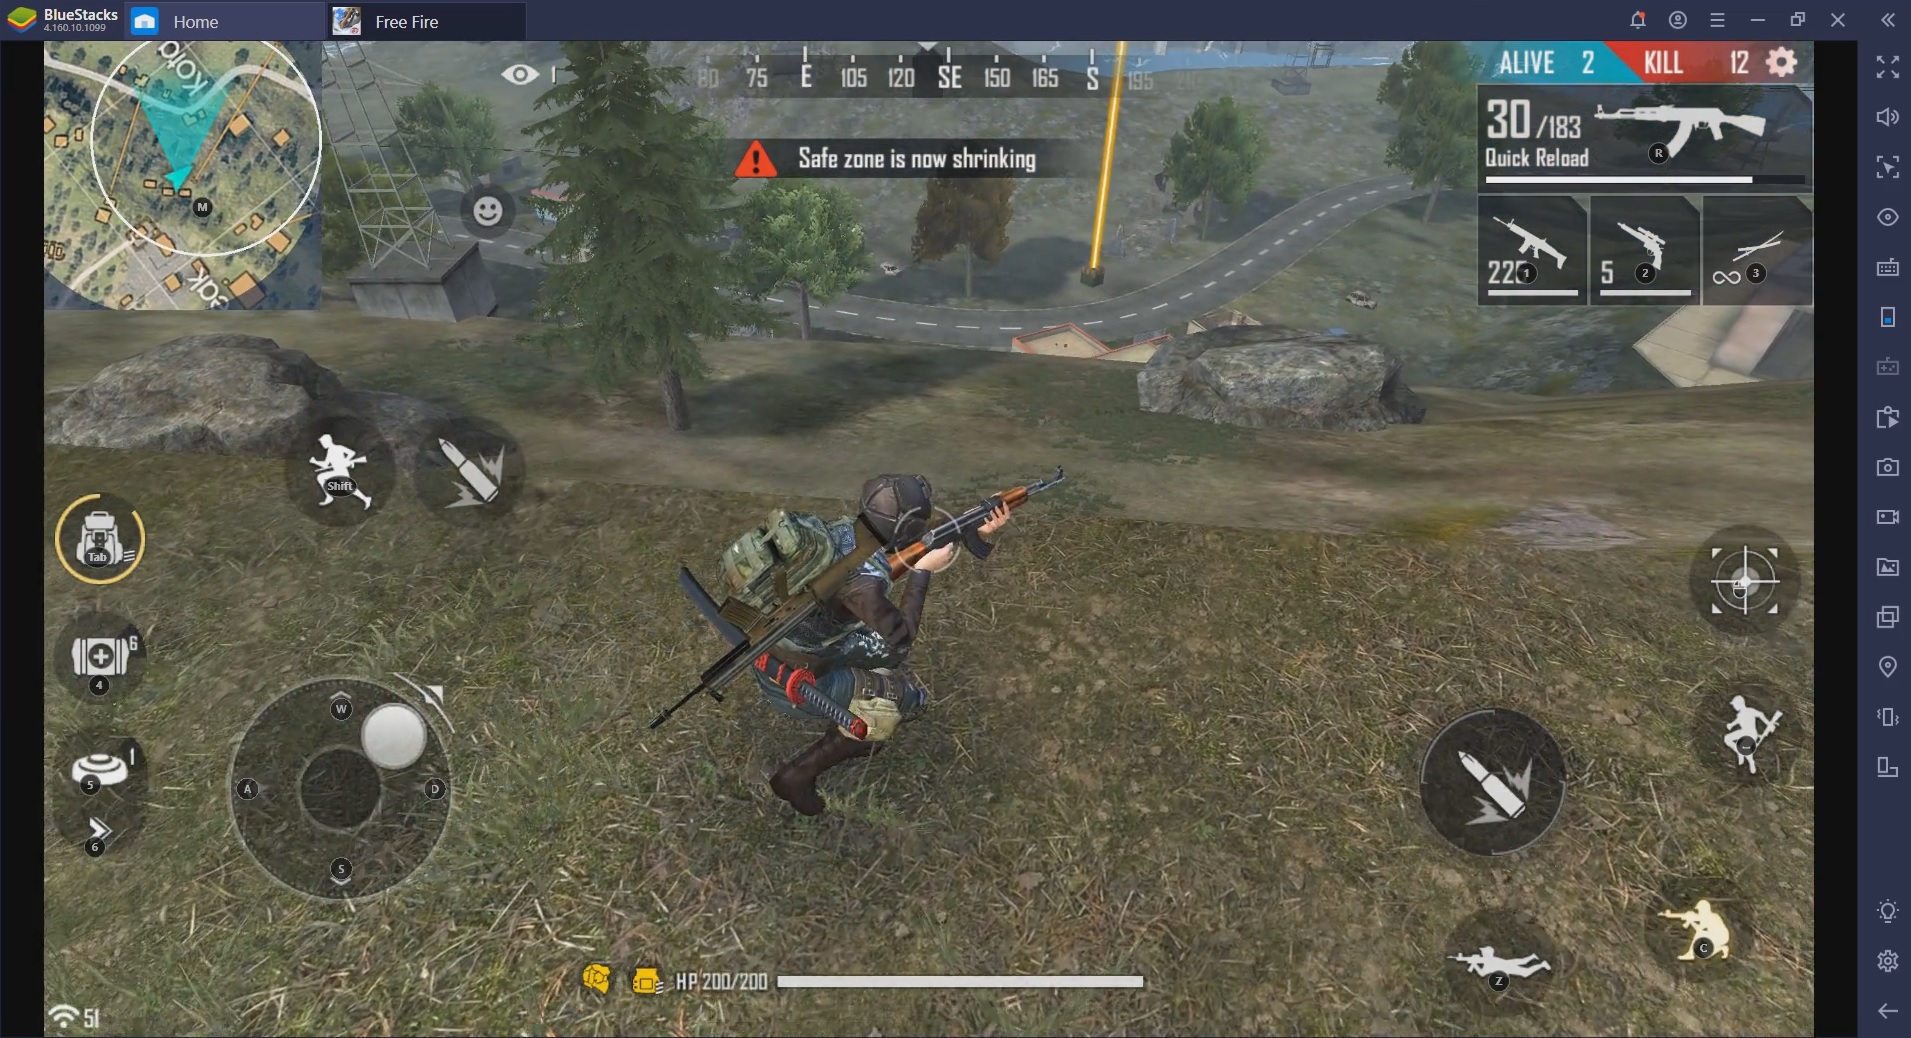 The New and Improved Smart Controls Feature for Free Fire and Call of Duty Mobile on PC